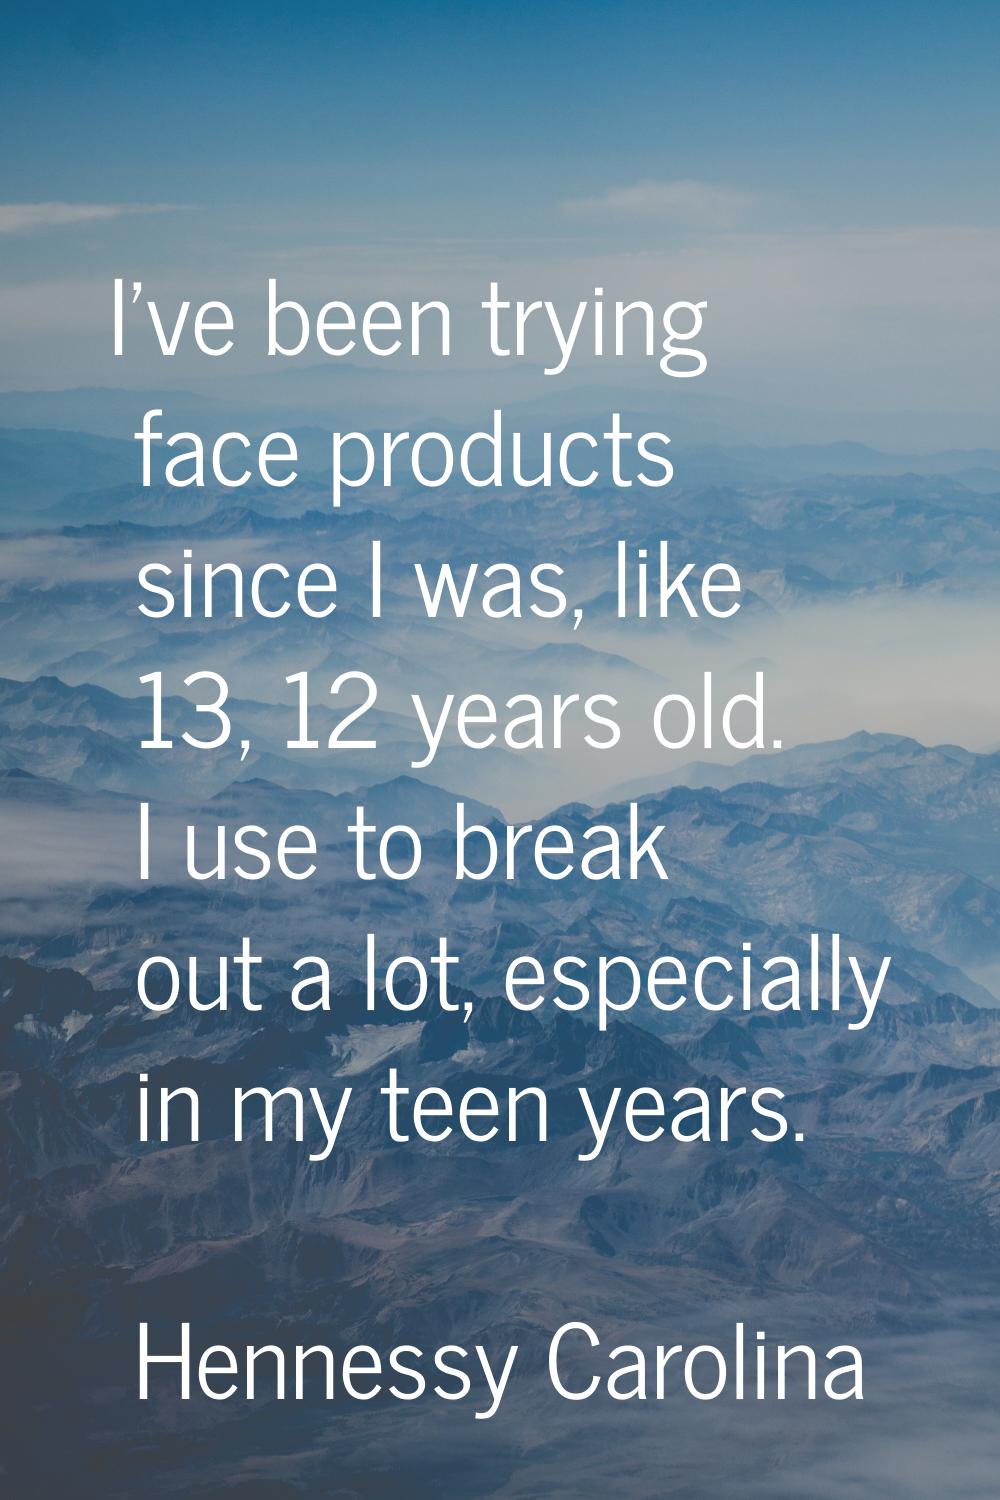 I've been trying face products since I was, like 13, 12 years old. I use to break out a lot, especi